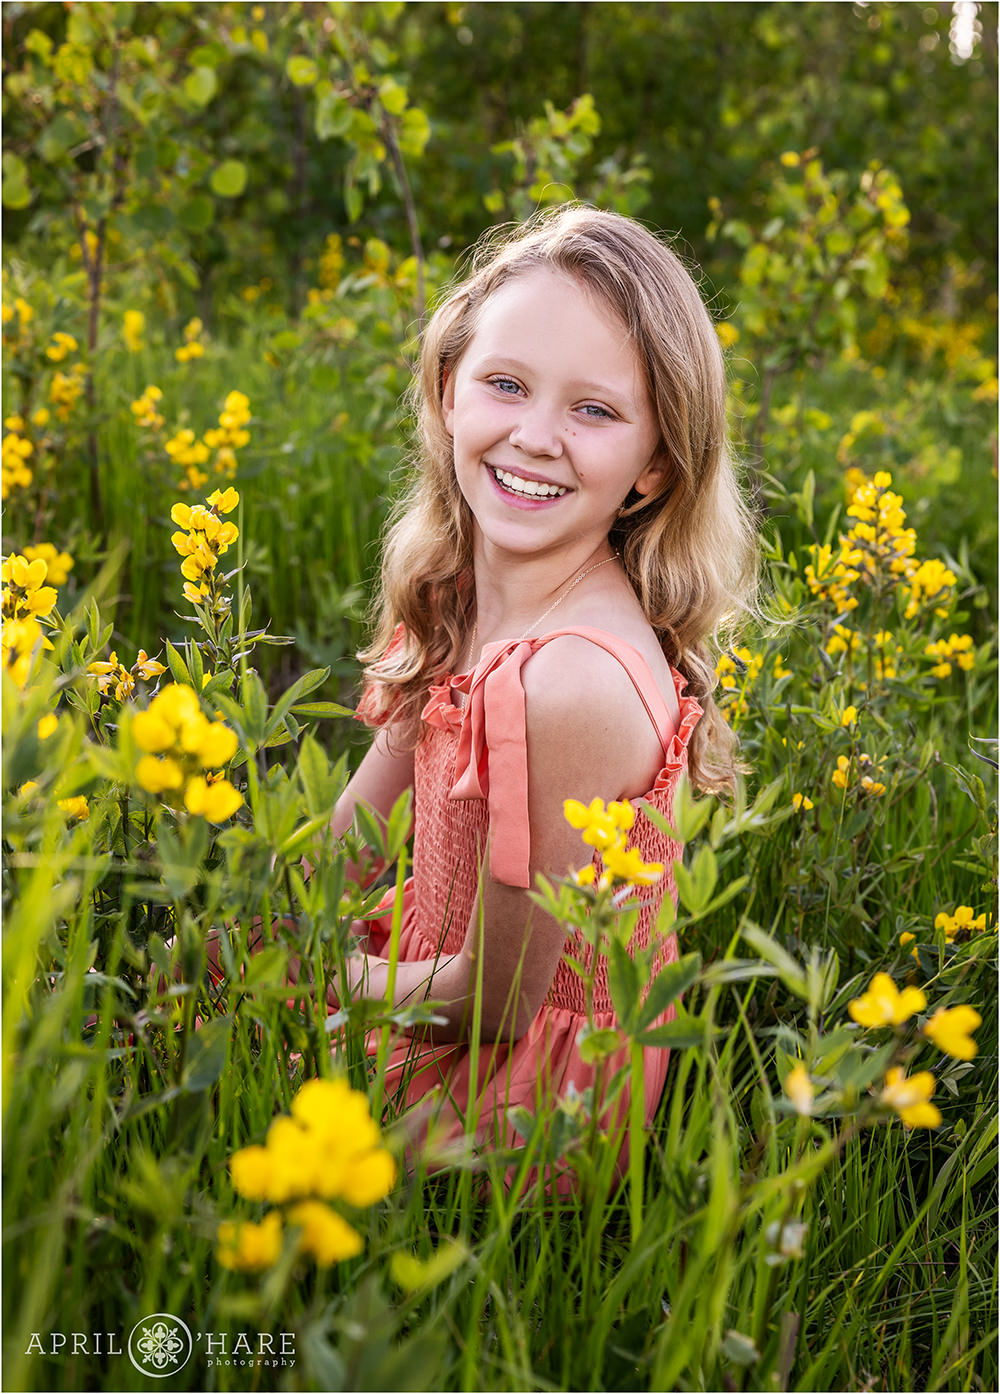 Beautiful portrait of a girl wearing a sundress sitting in a Colorado mountain meadow with yellow wildflowers